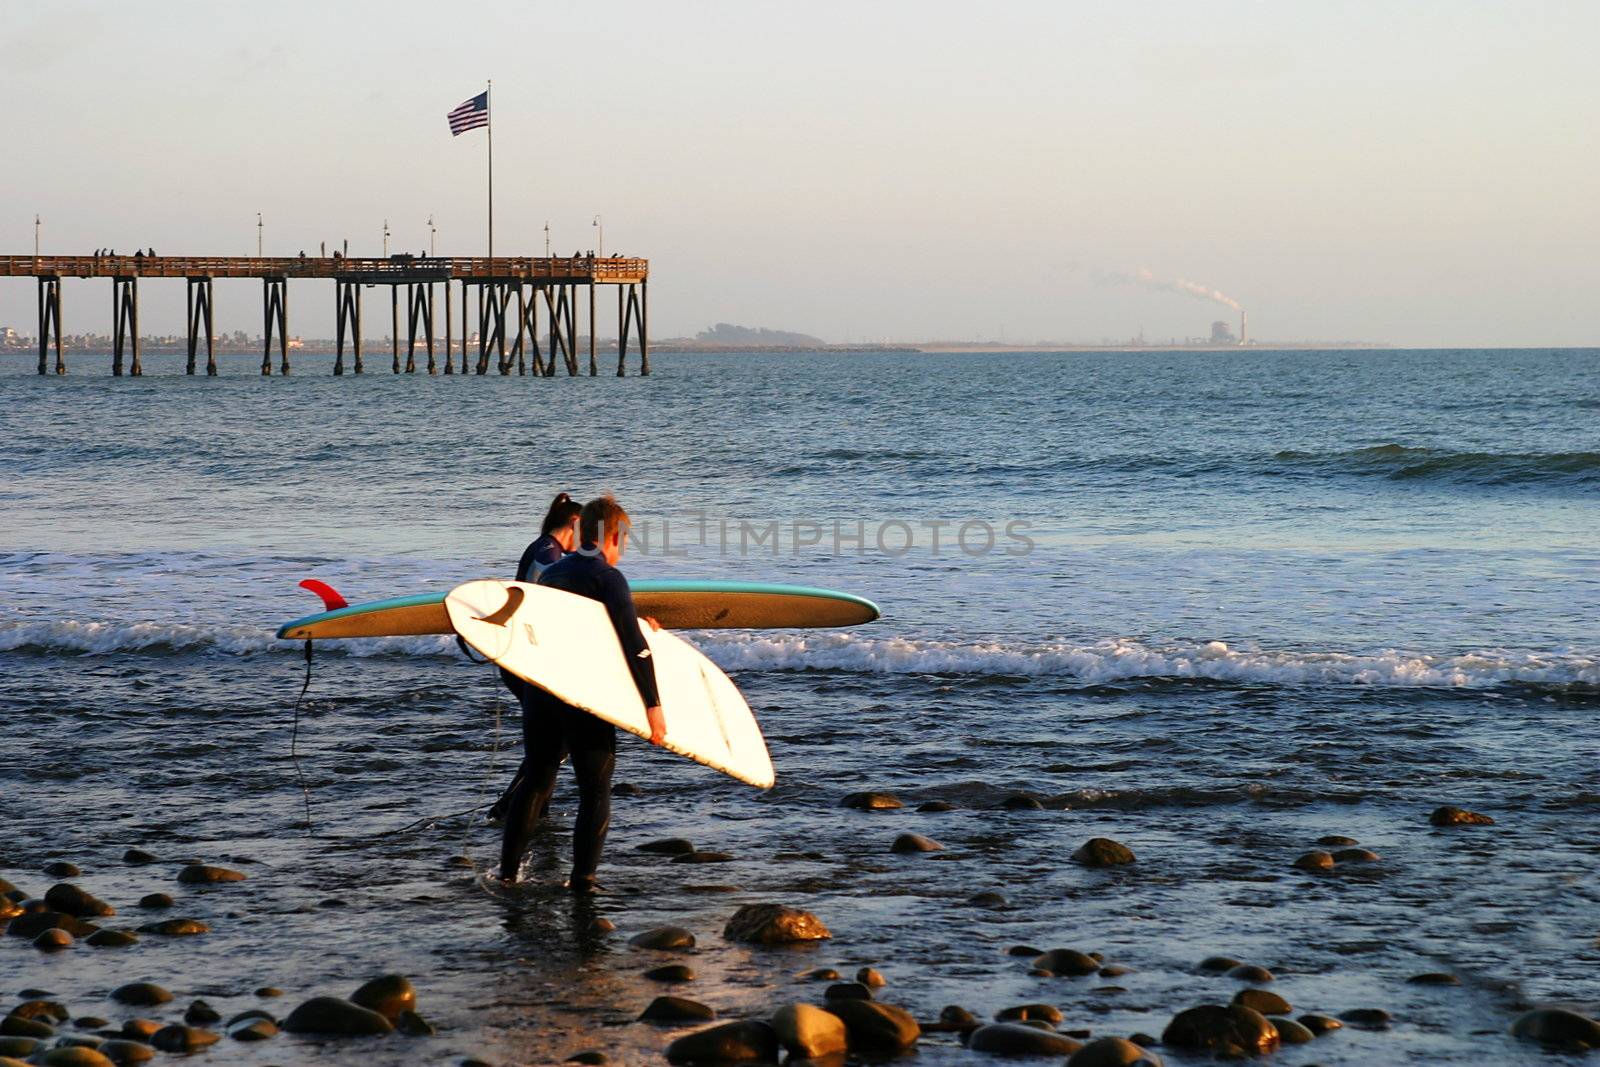 Surfer at sunset at the beach near the pier in Ventura California.